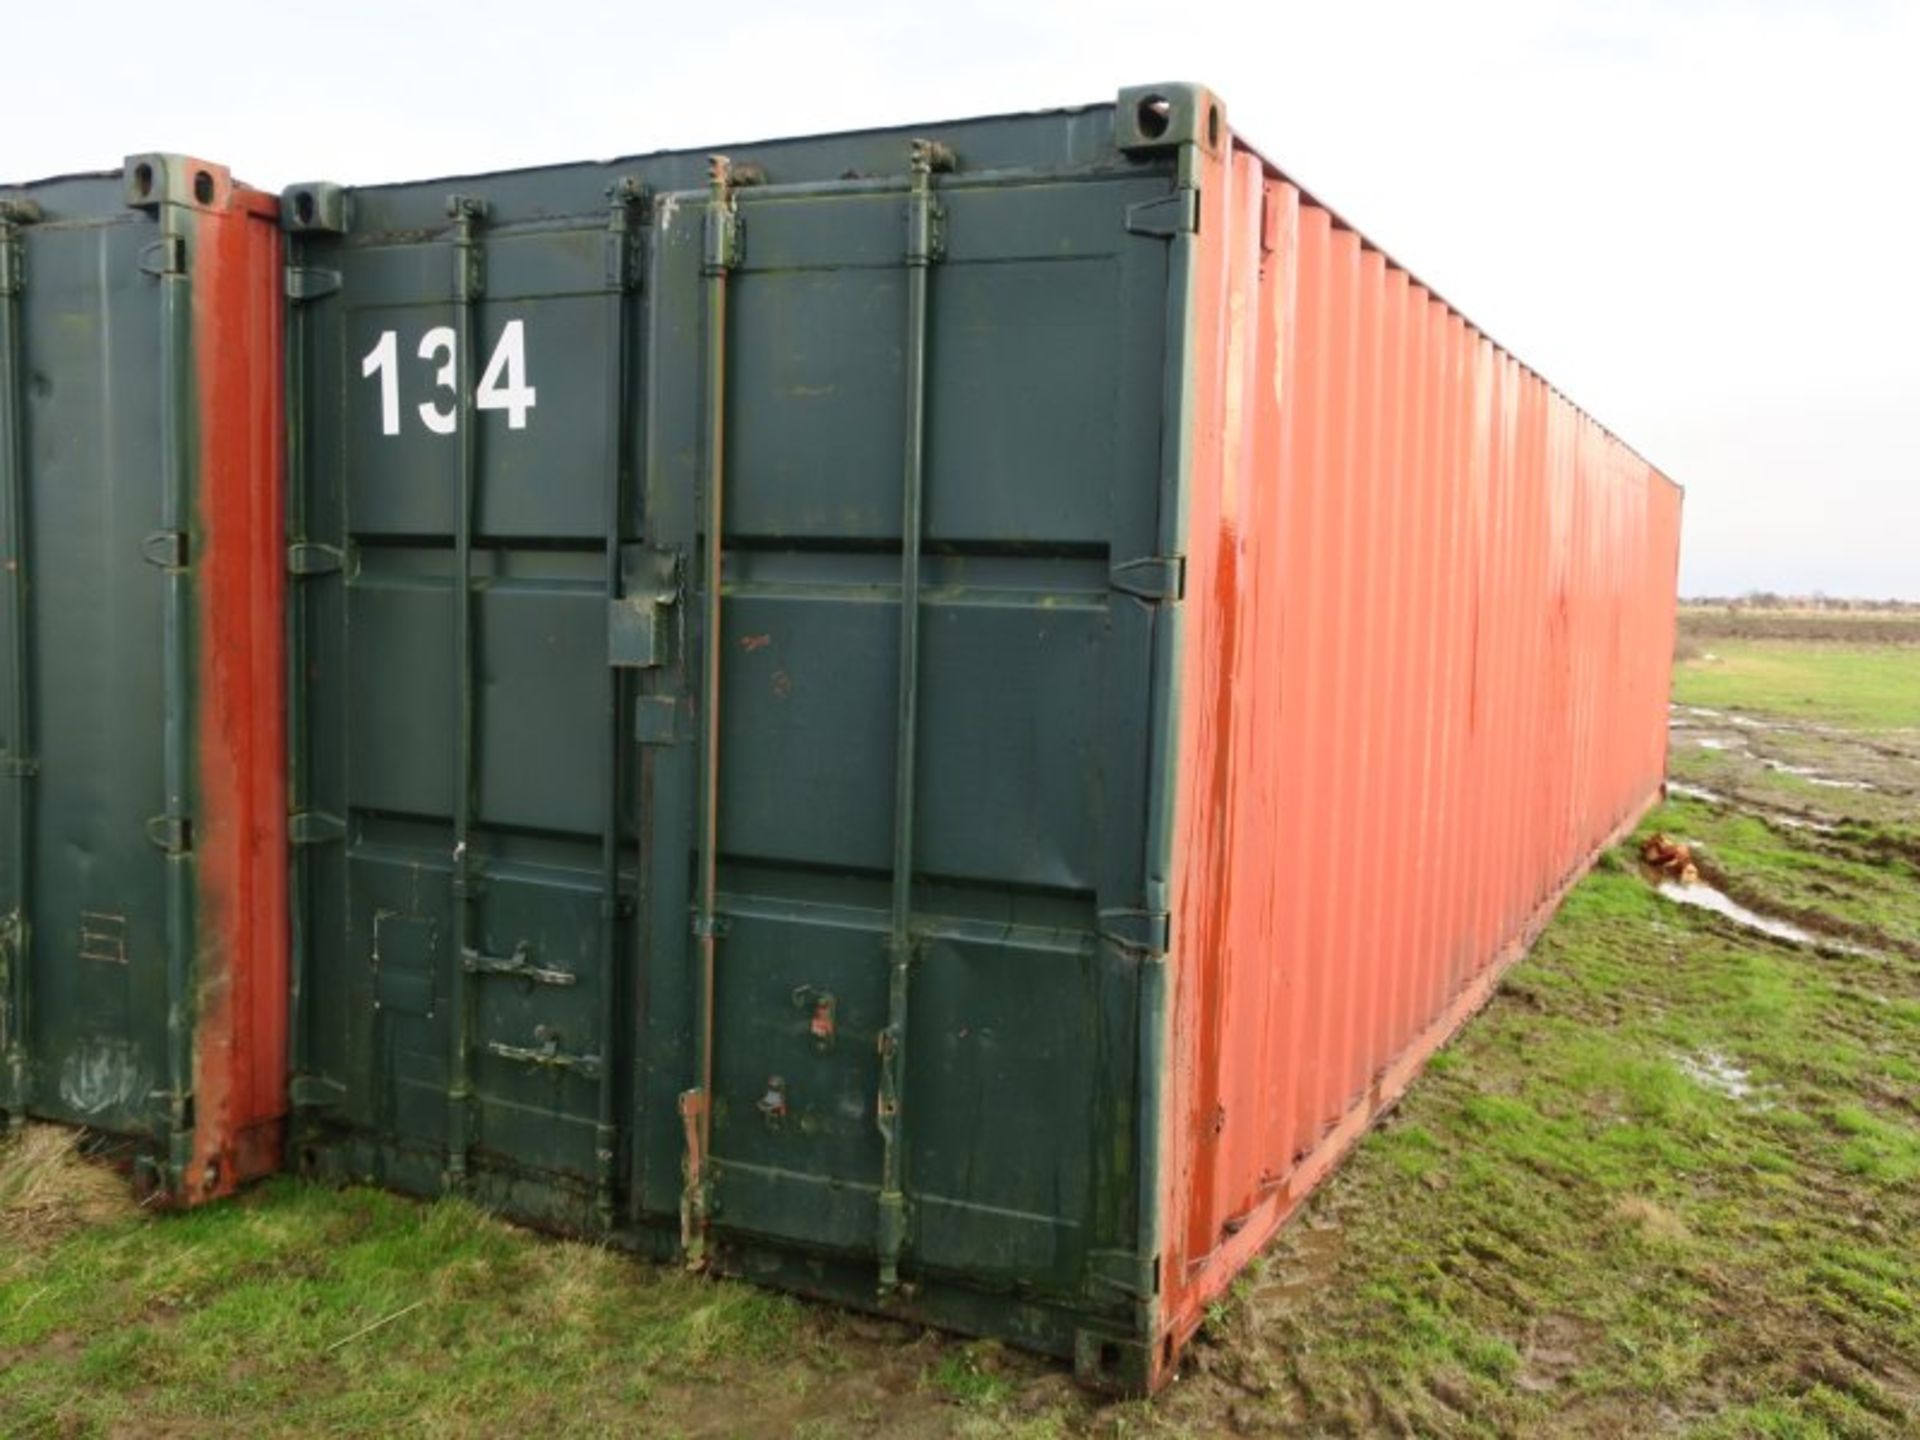 * 40' Shipping container with insulated roof (container ID 134). Sold loaded onto buyers